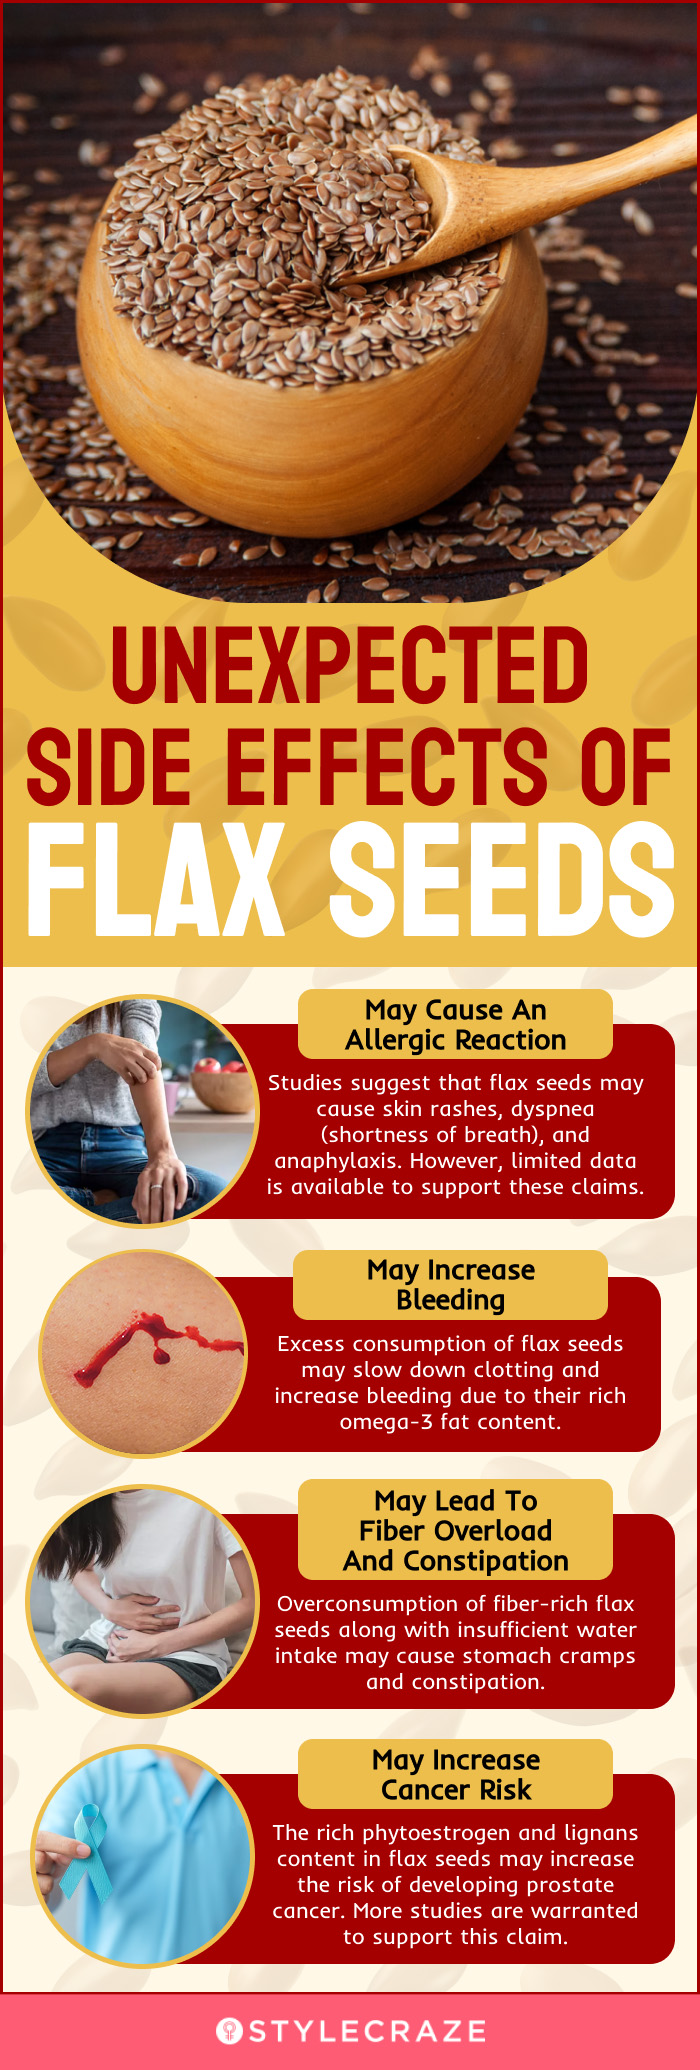 Flax Seeds For Hair Growth: Flaxseeds Are Tremendous To Get Long And Thick  Hair, Know How To Use It | Health Benefits Of Flaxseed - Flax Seeds For Hair:  लंबे और घने